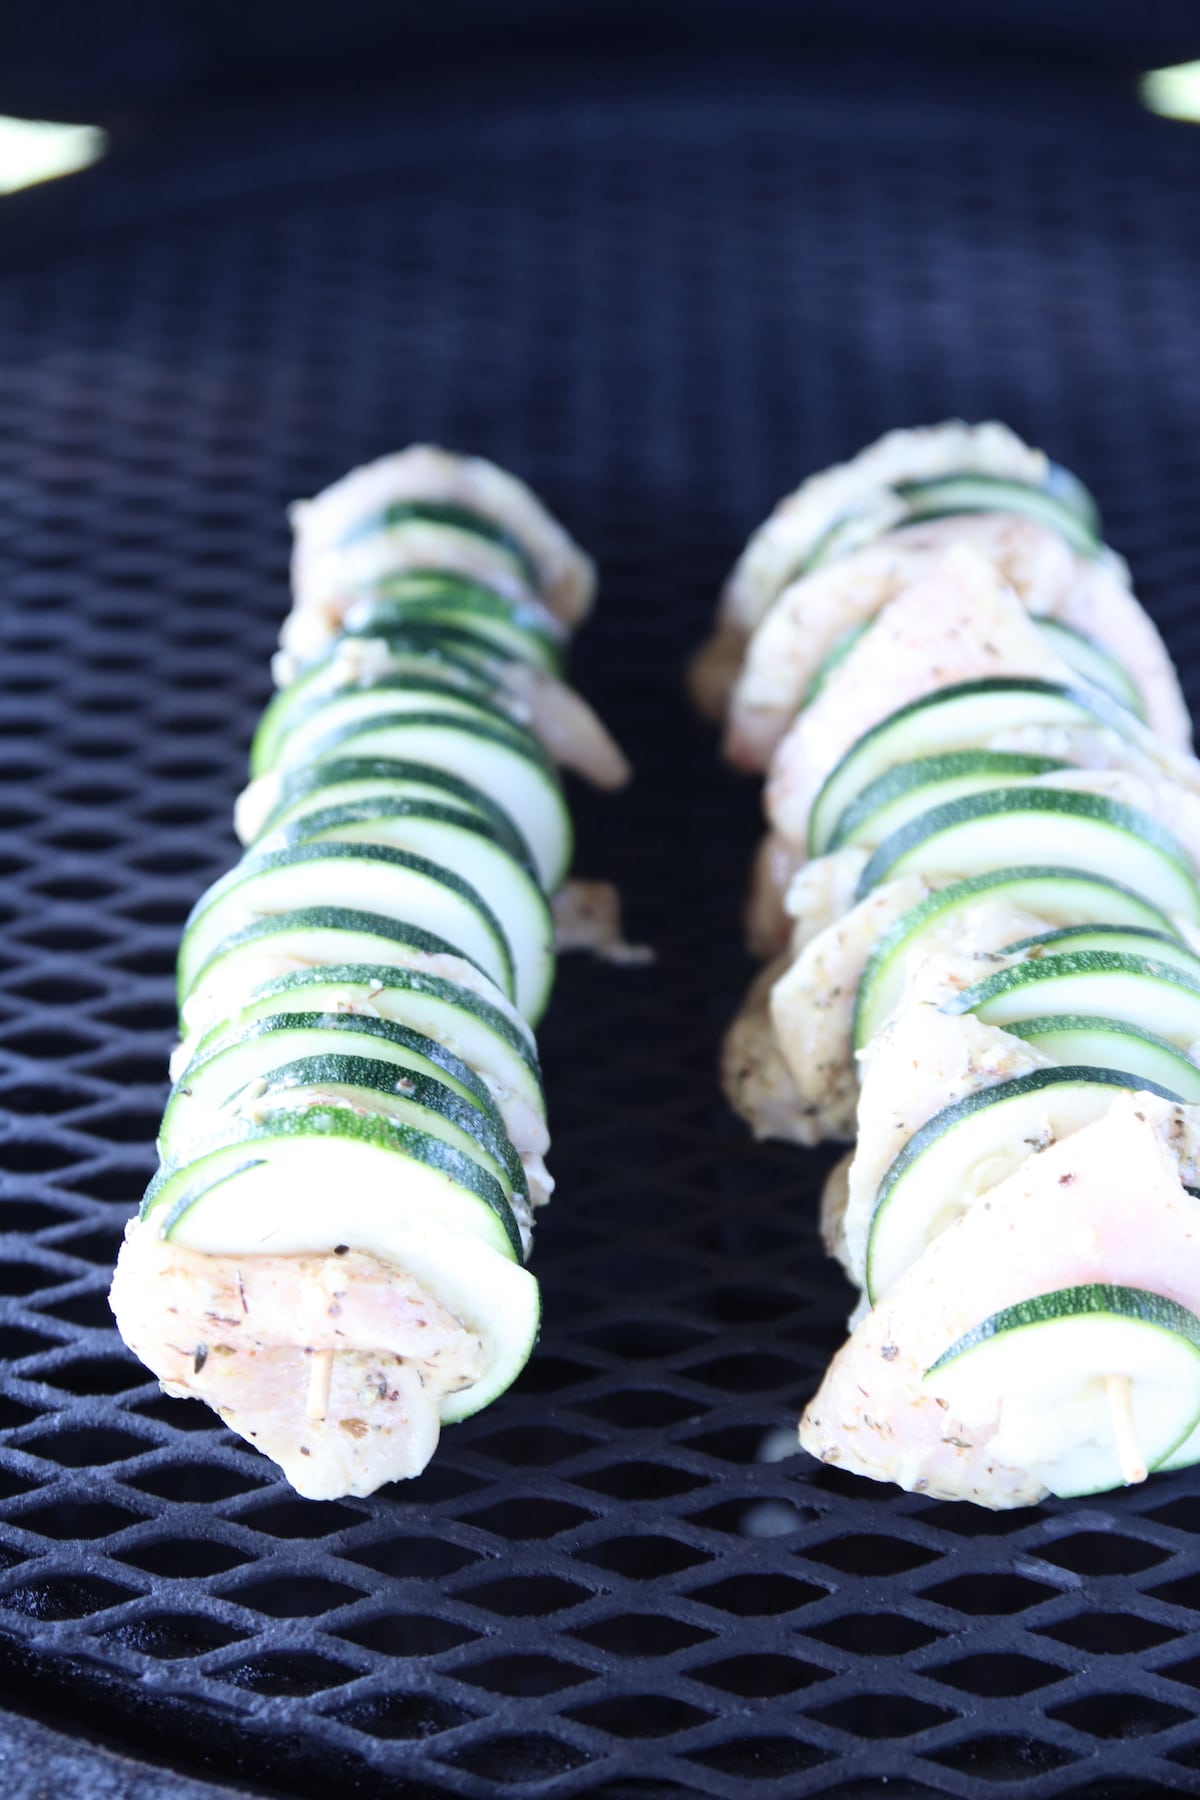 Grilling skewers with zucchini and chicken.